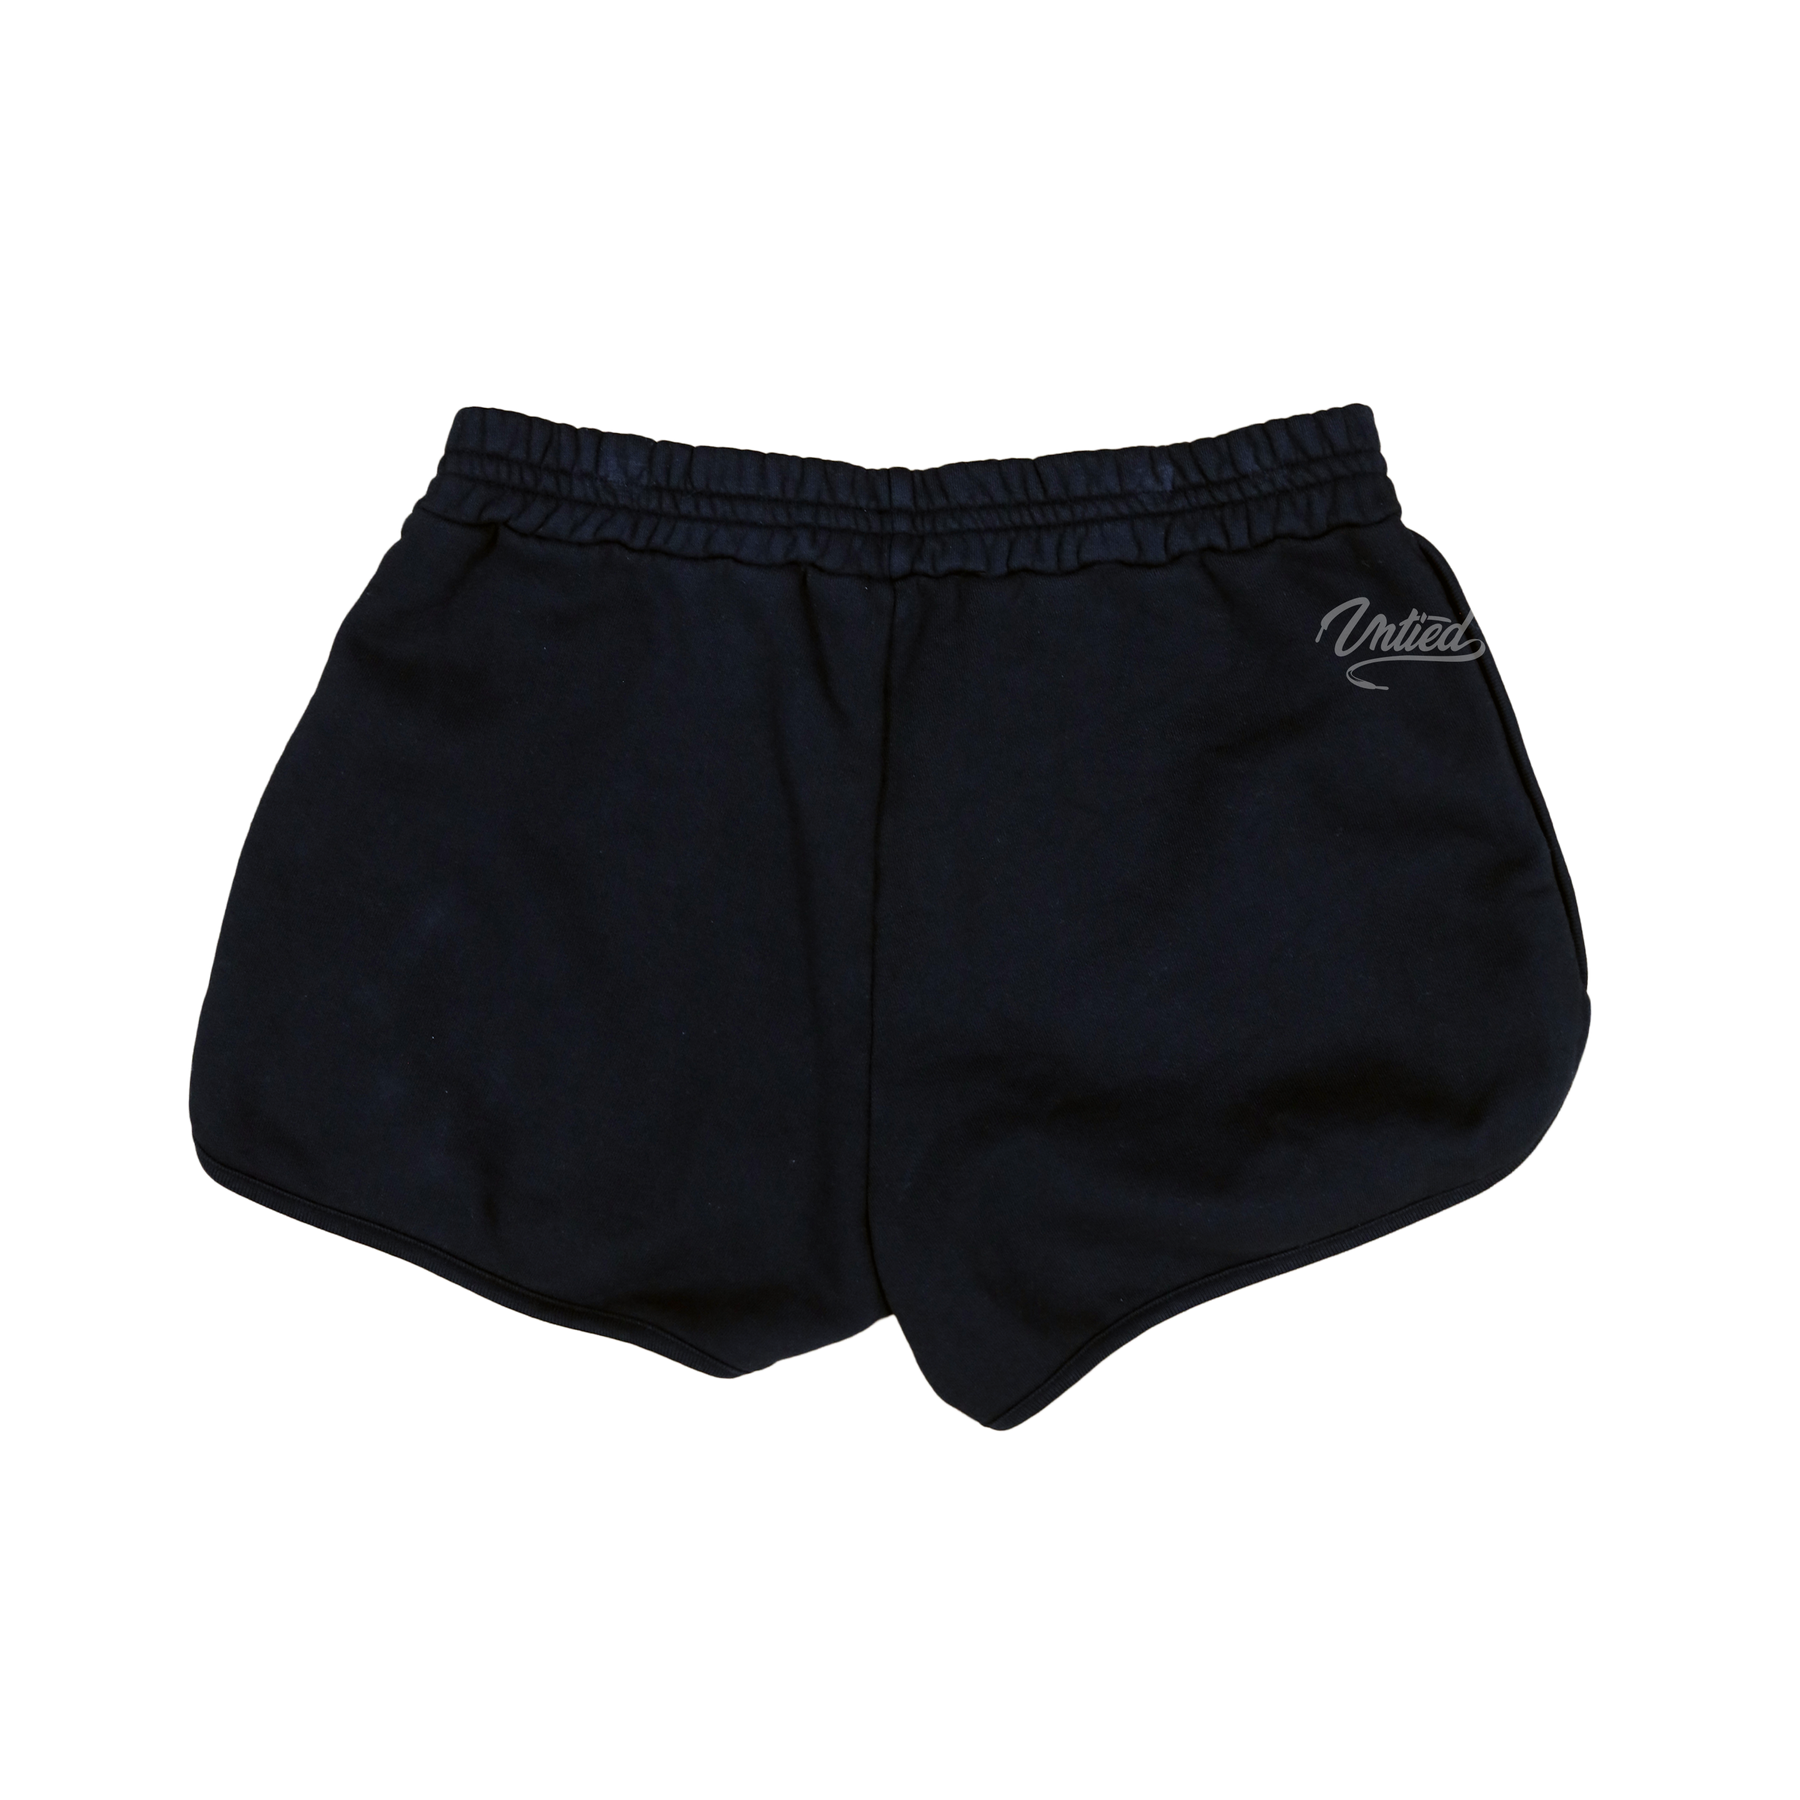 Chrome Hearts Womens Patches Shorts "Black"